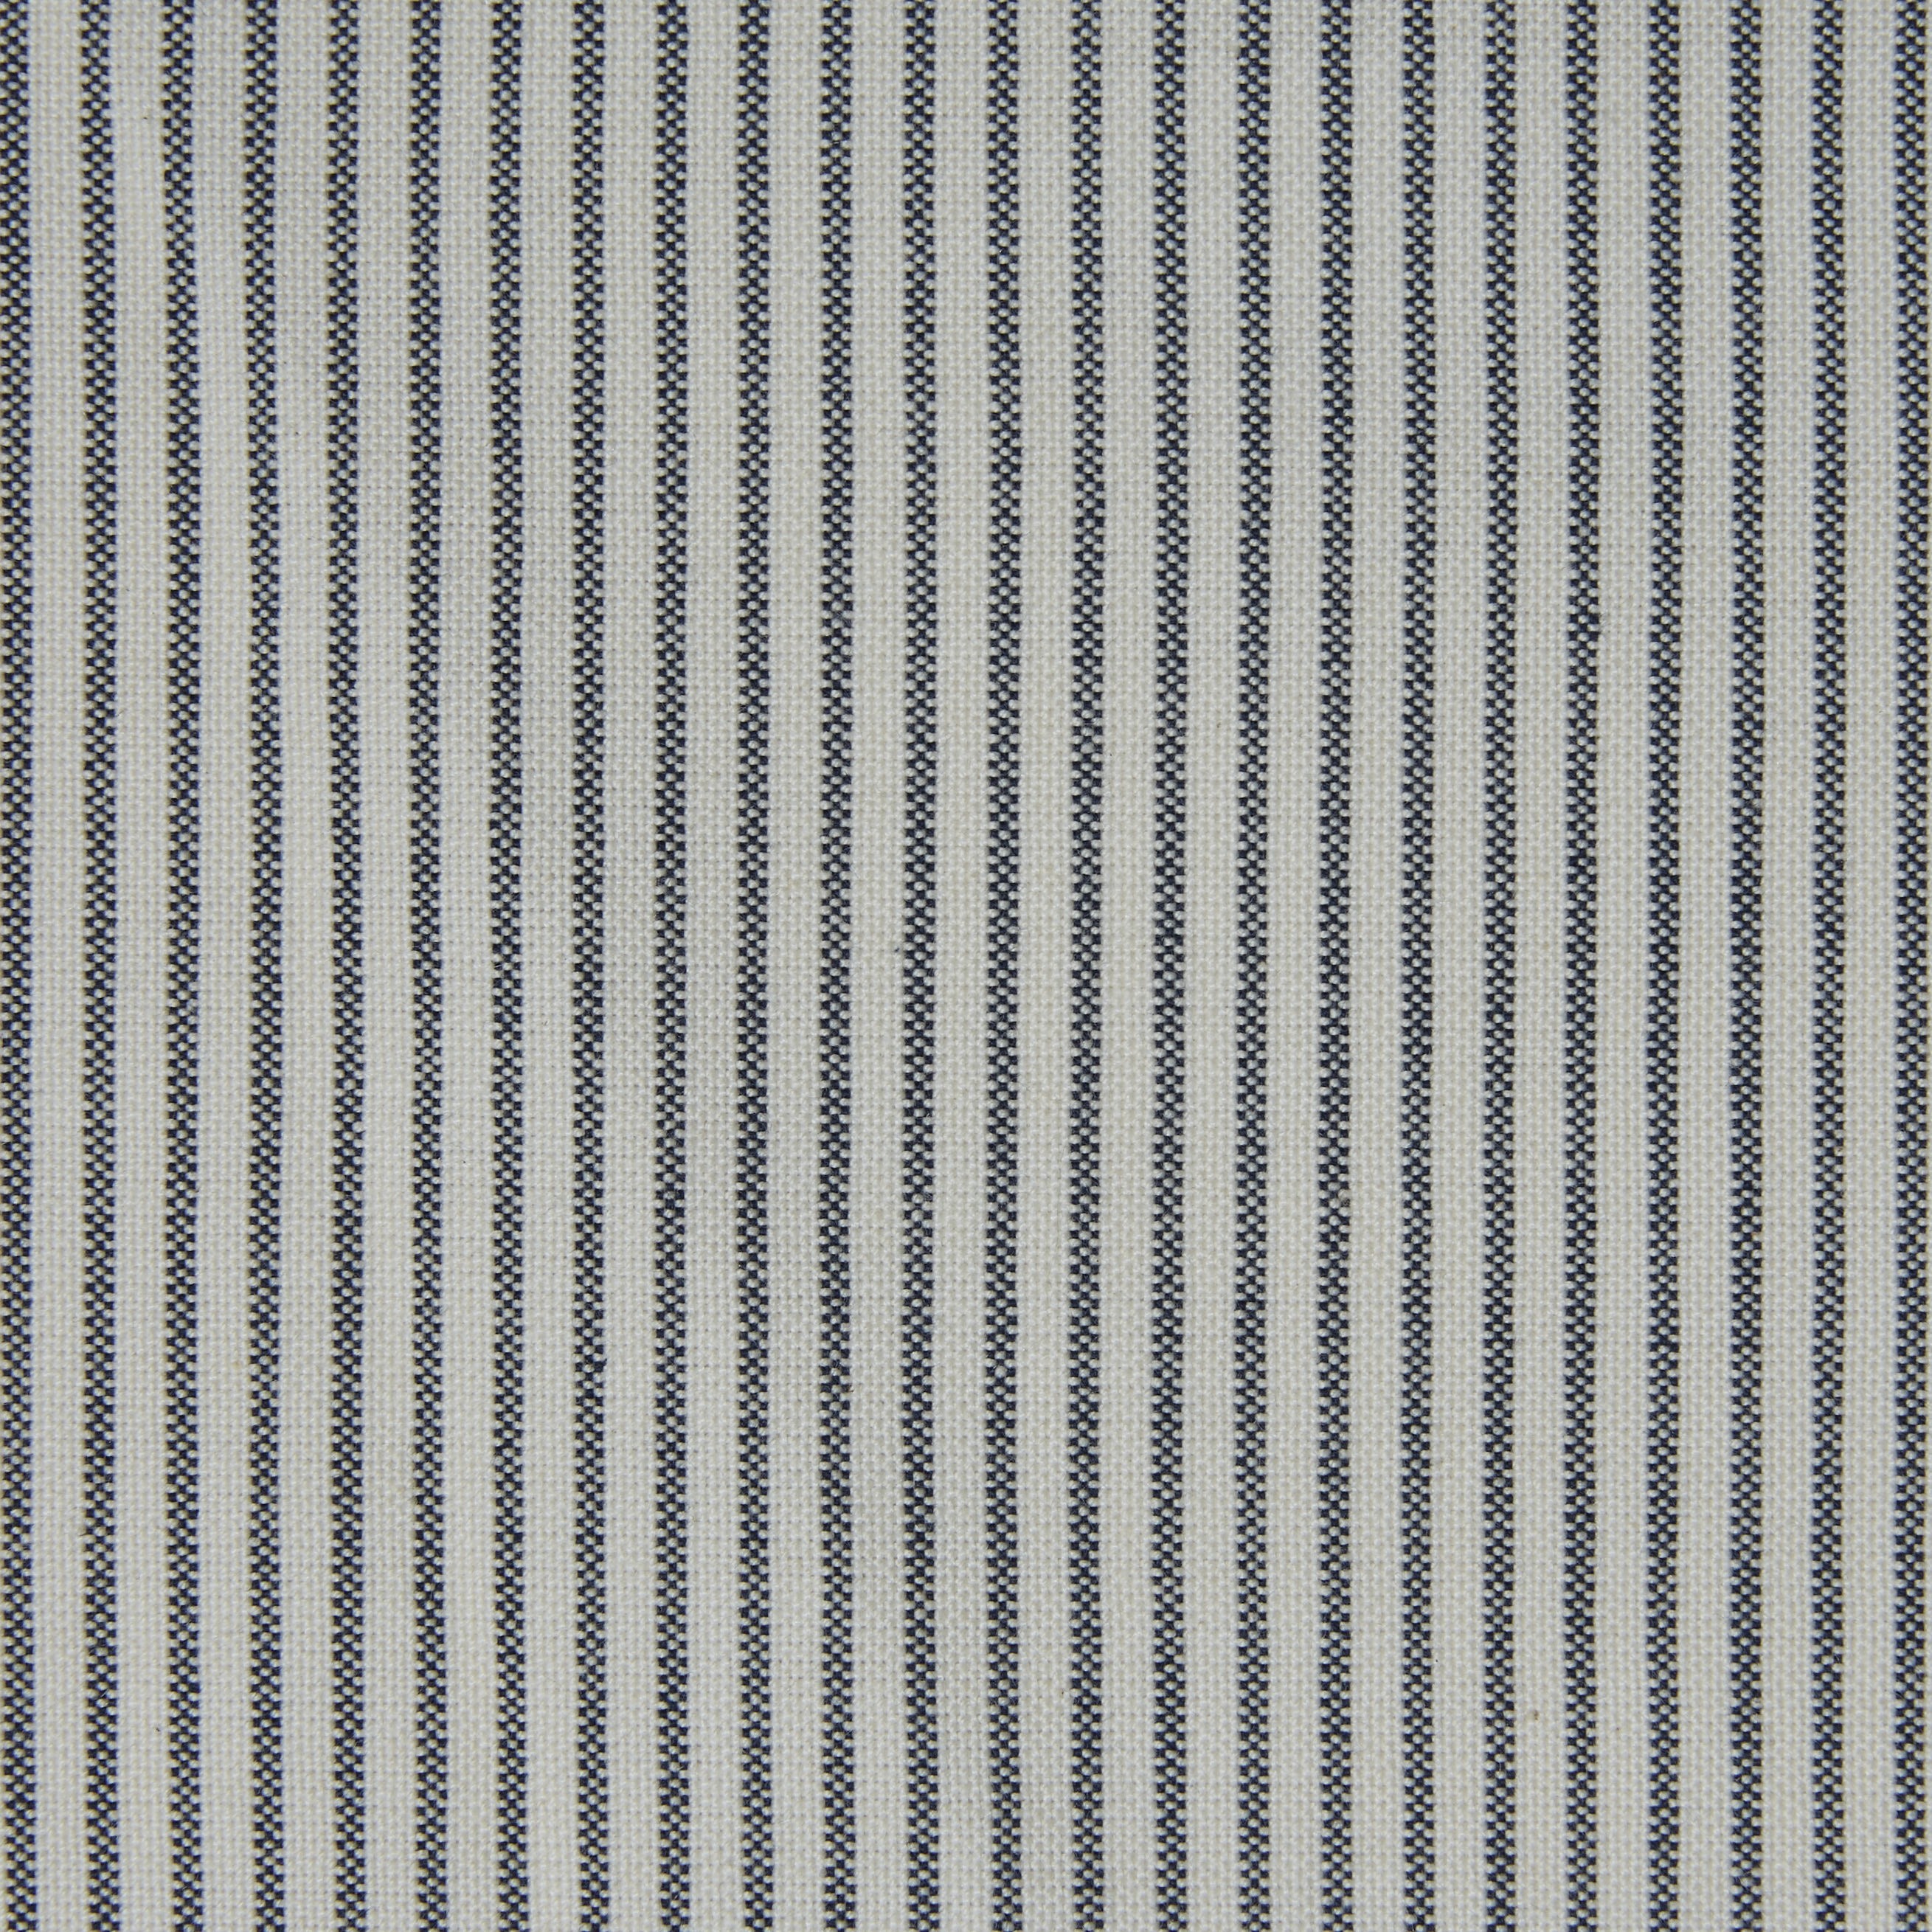 a close up of a blue and white striped fabric